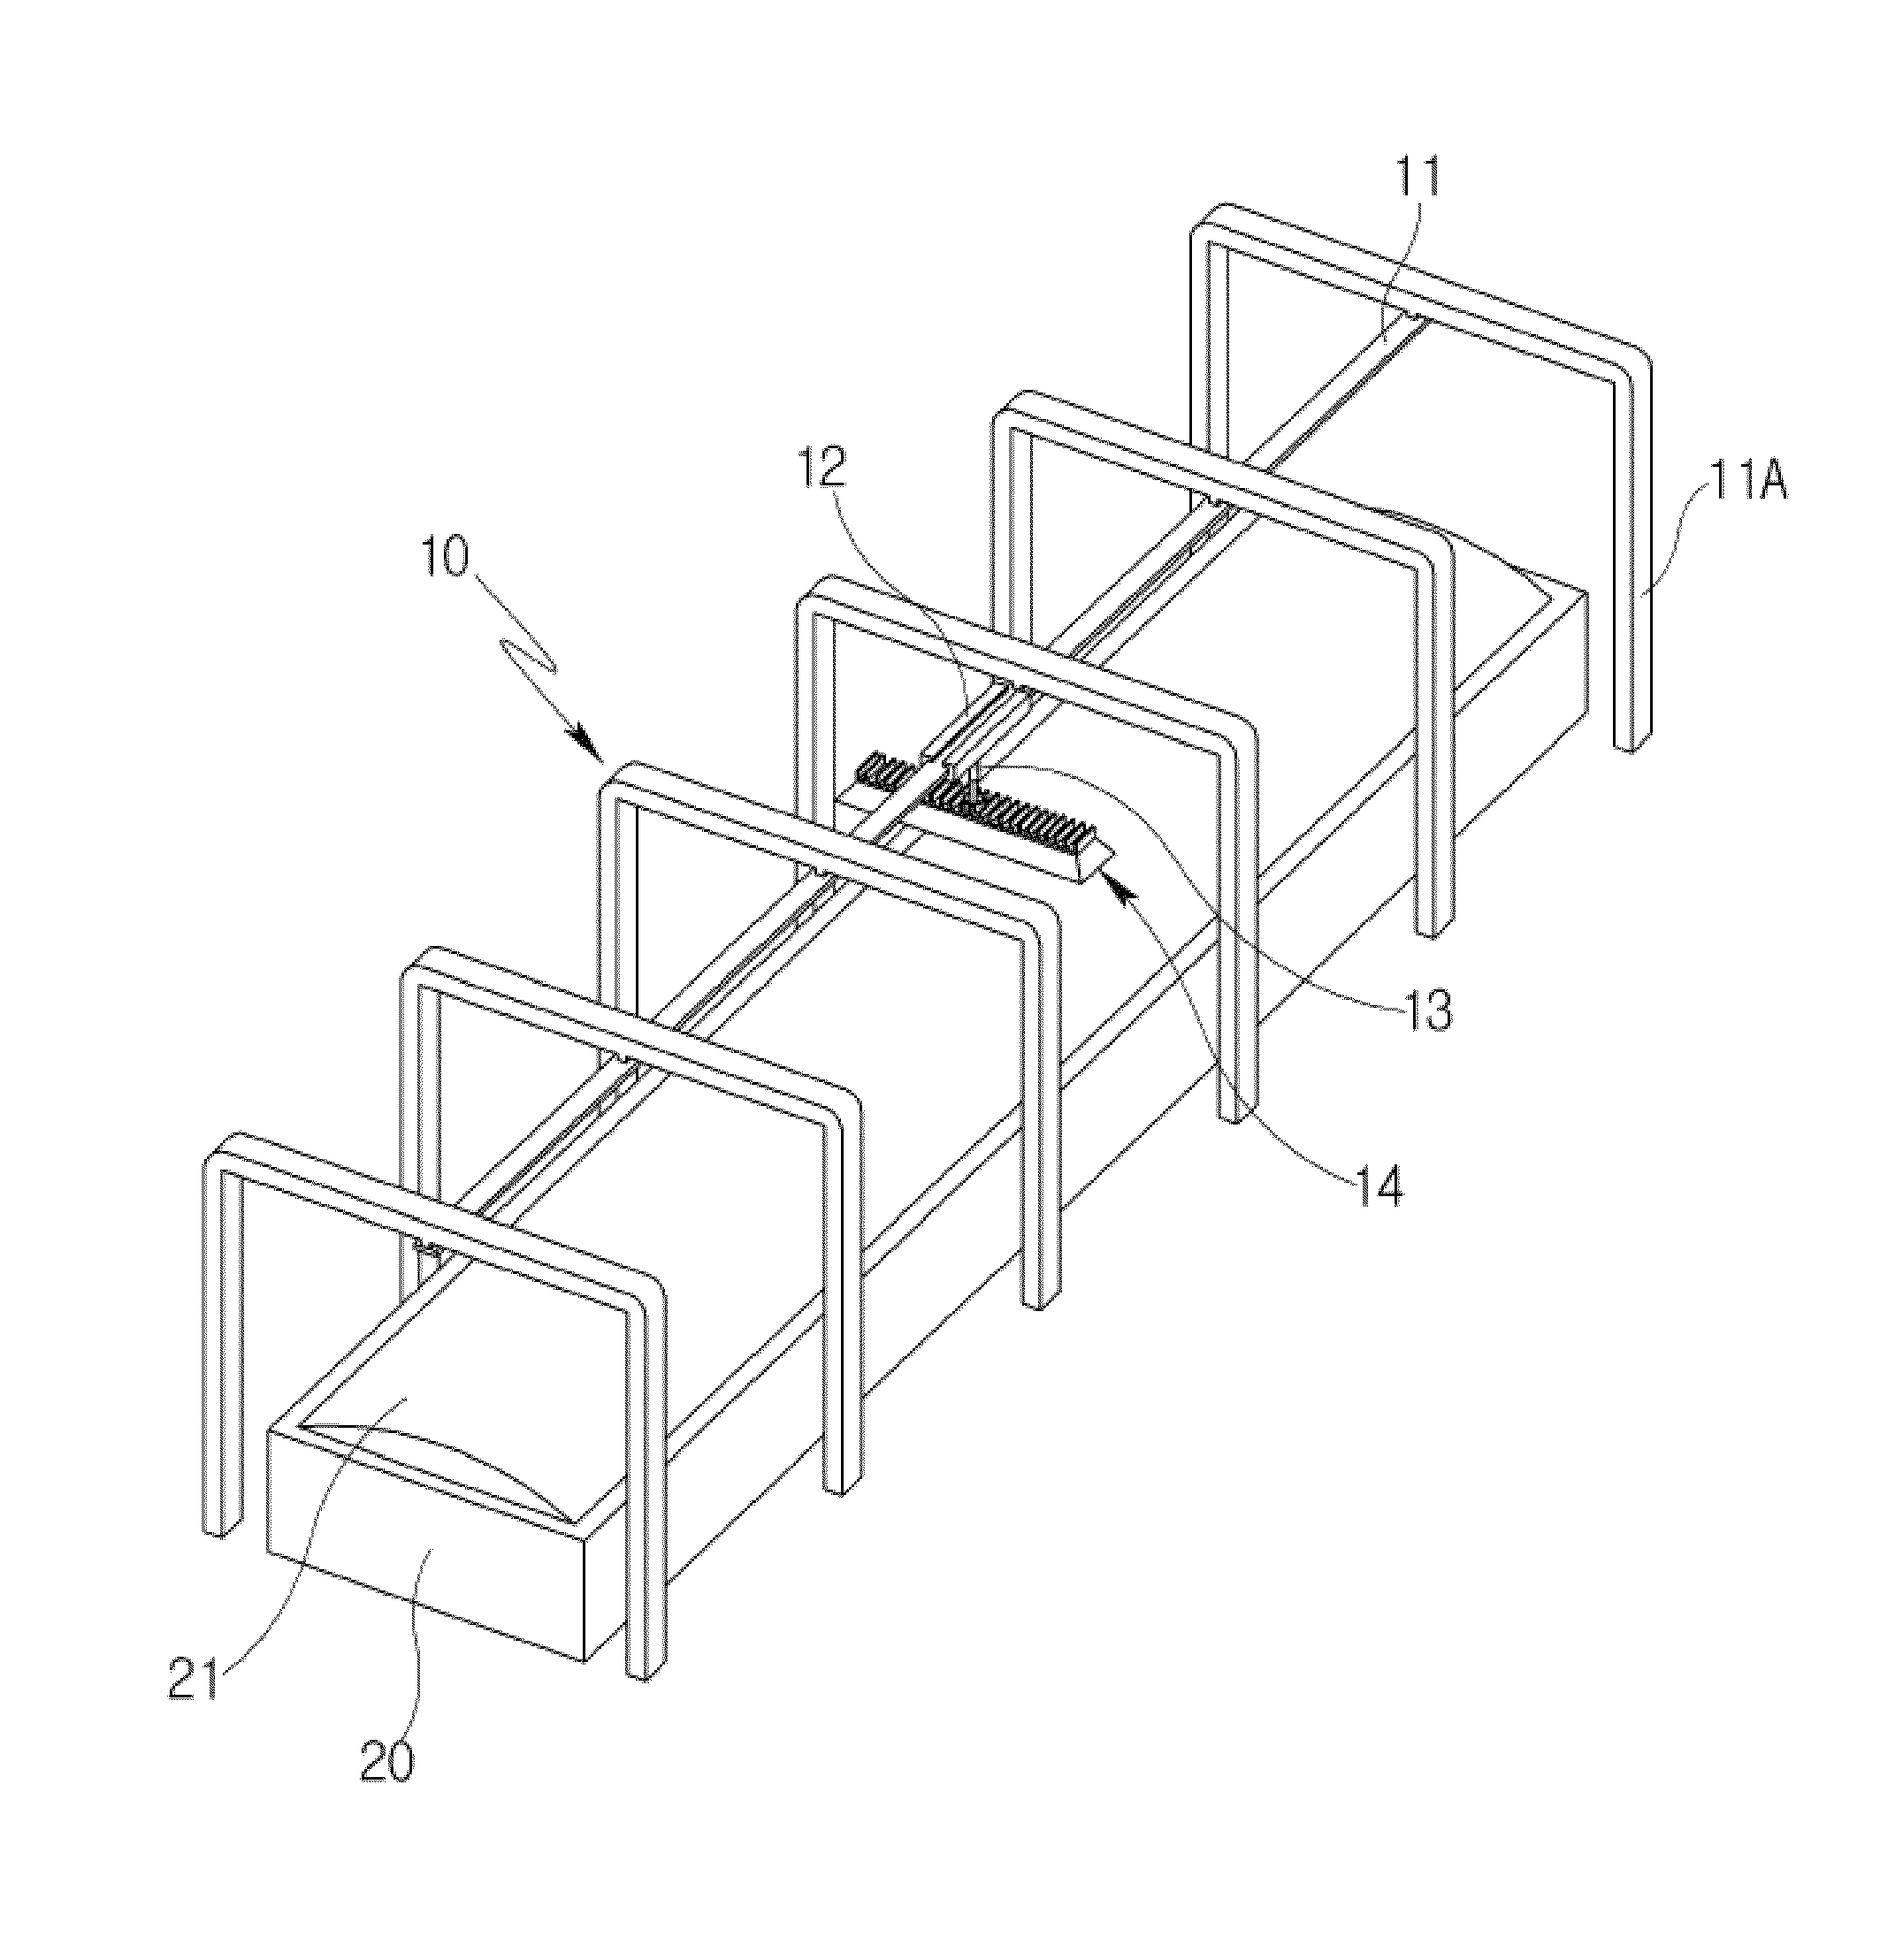 Plant cultivation apparatus for producing the plant having high content of ginsenosides